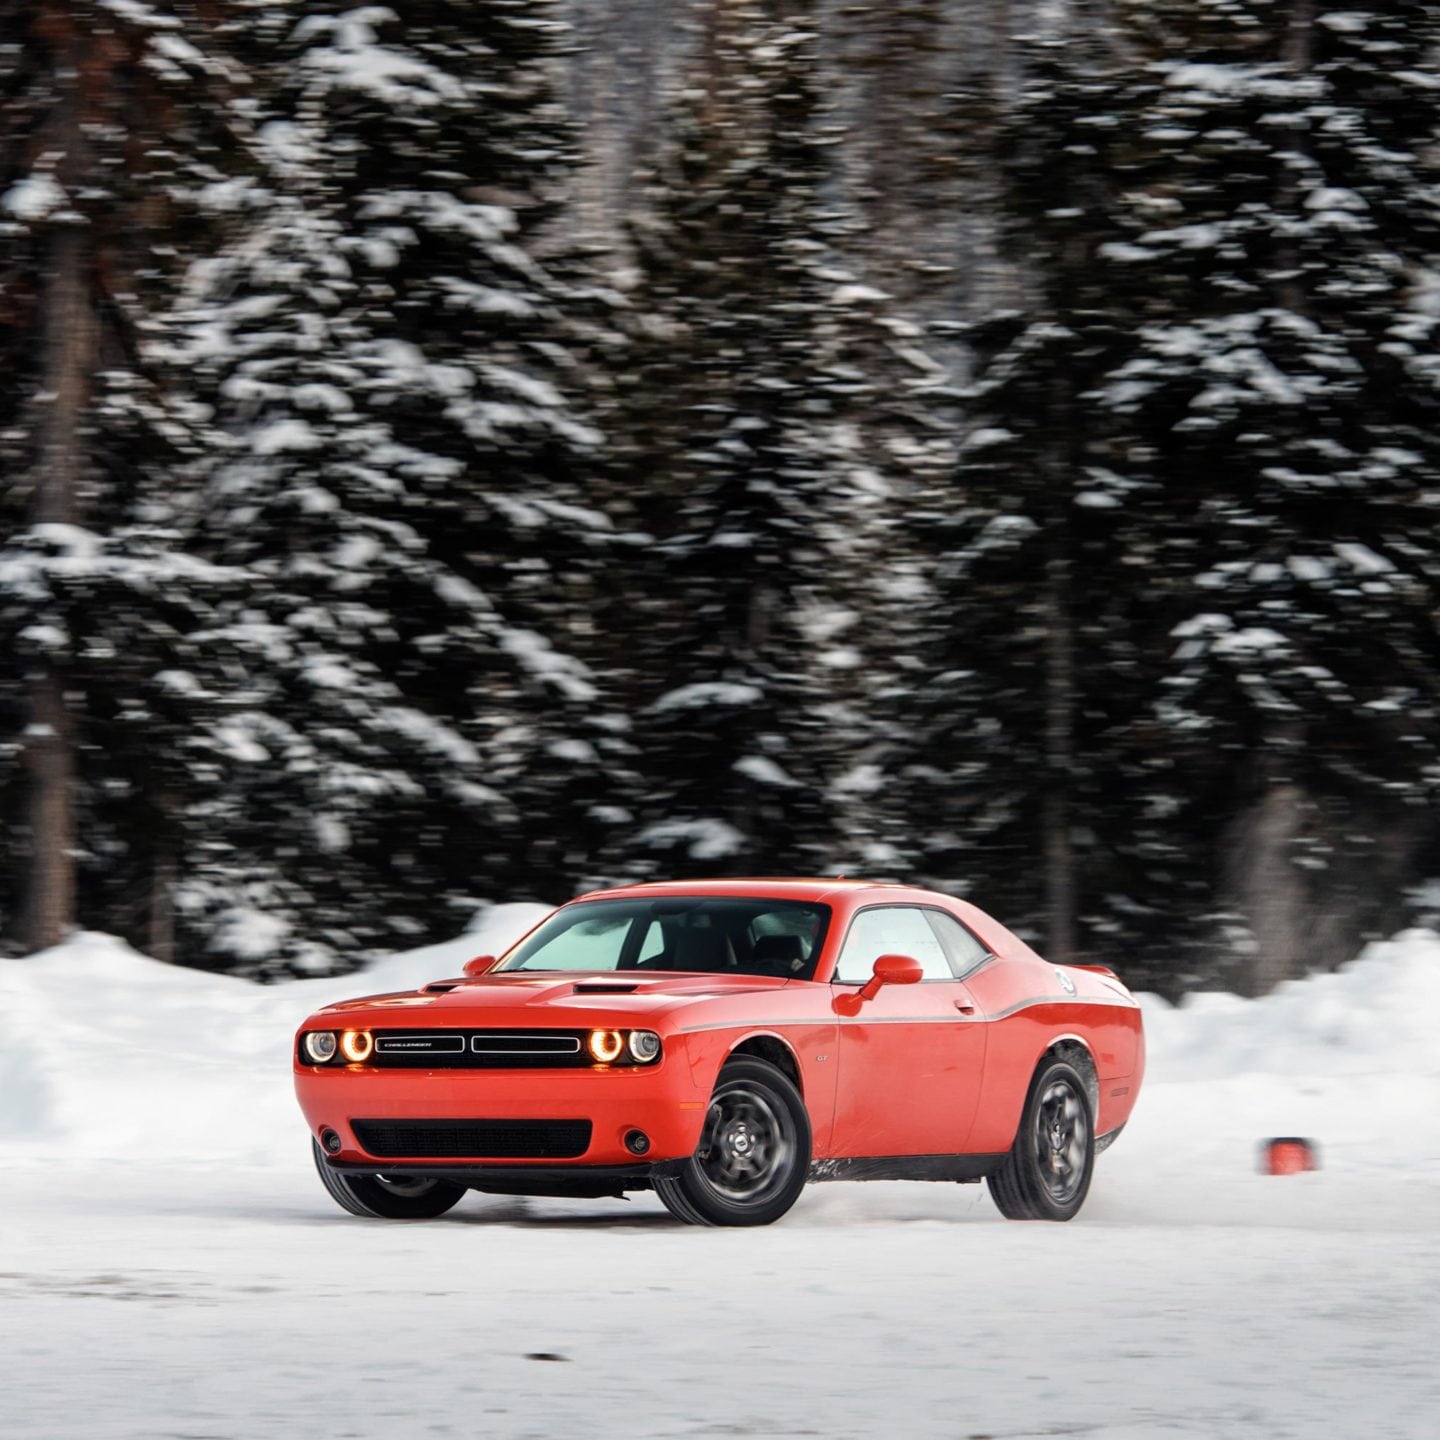 2018 Dodge Challenger GT, Performance on Ice and Everyday